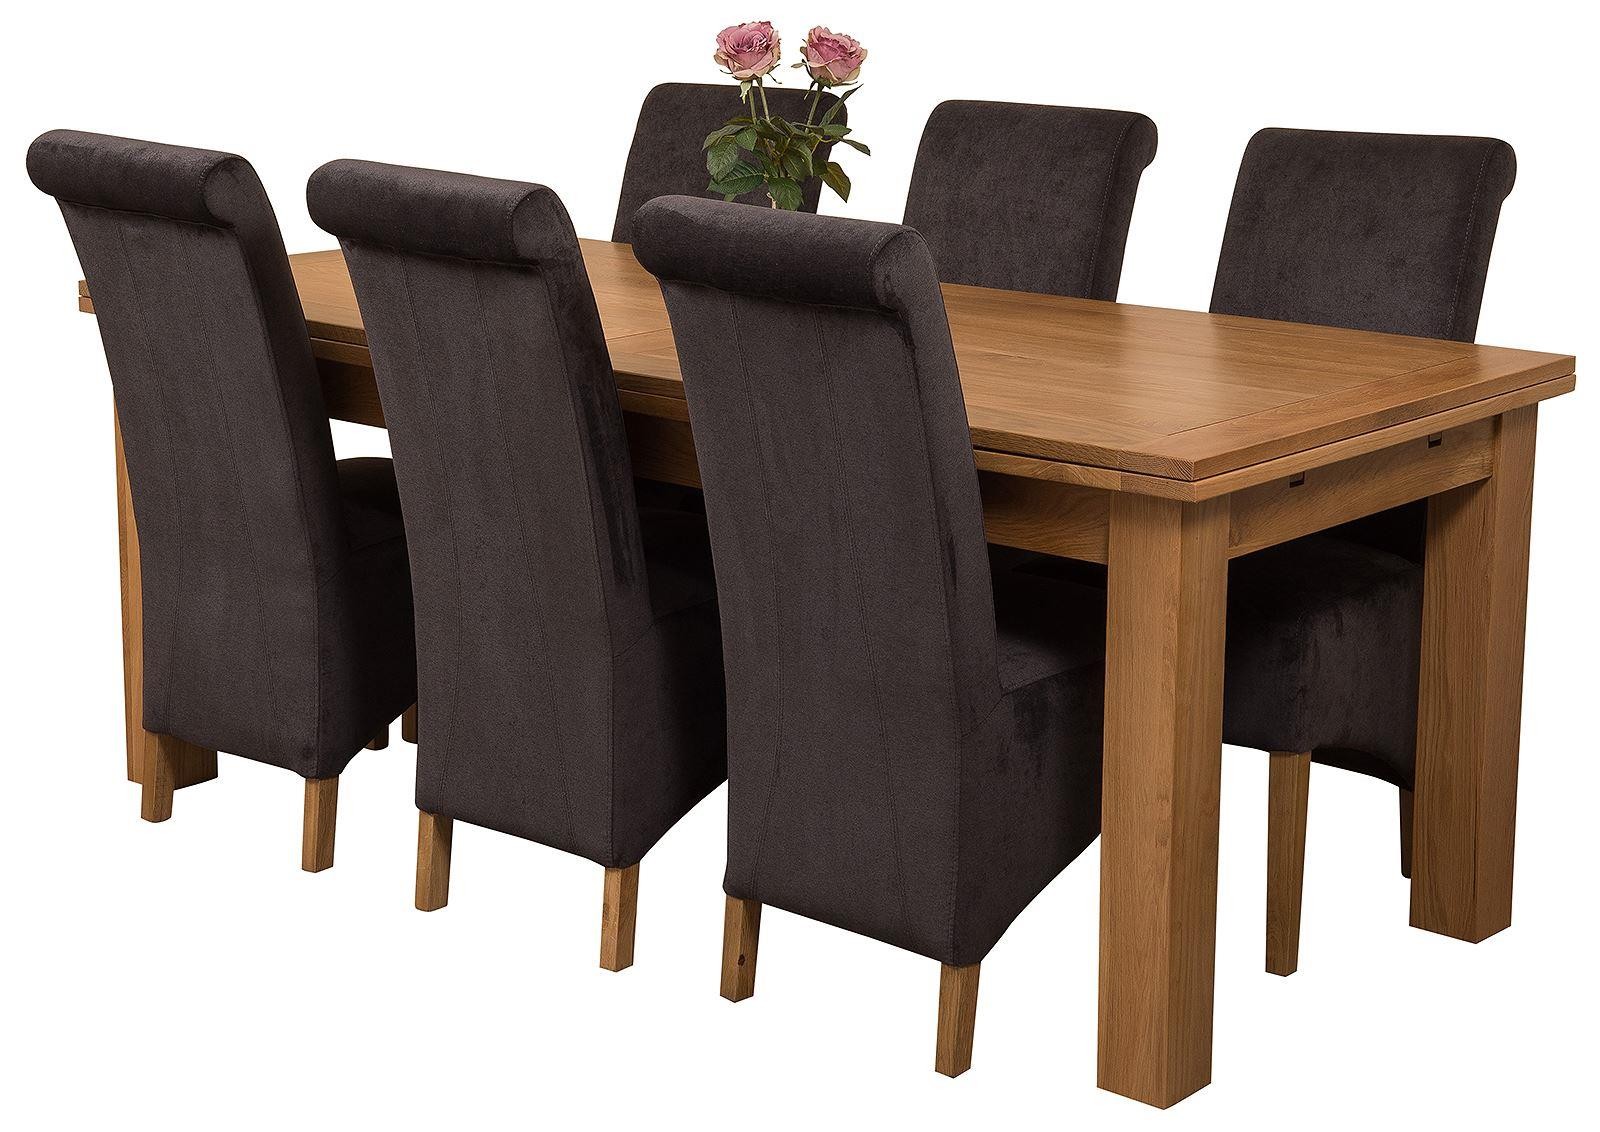 Richmond Solid Oak 200cm-280cm Extending Dining Table with 6 Montana Dining Chairs [Black Fabric]